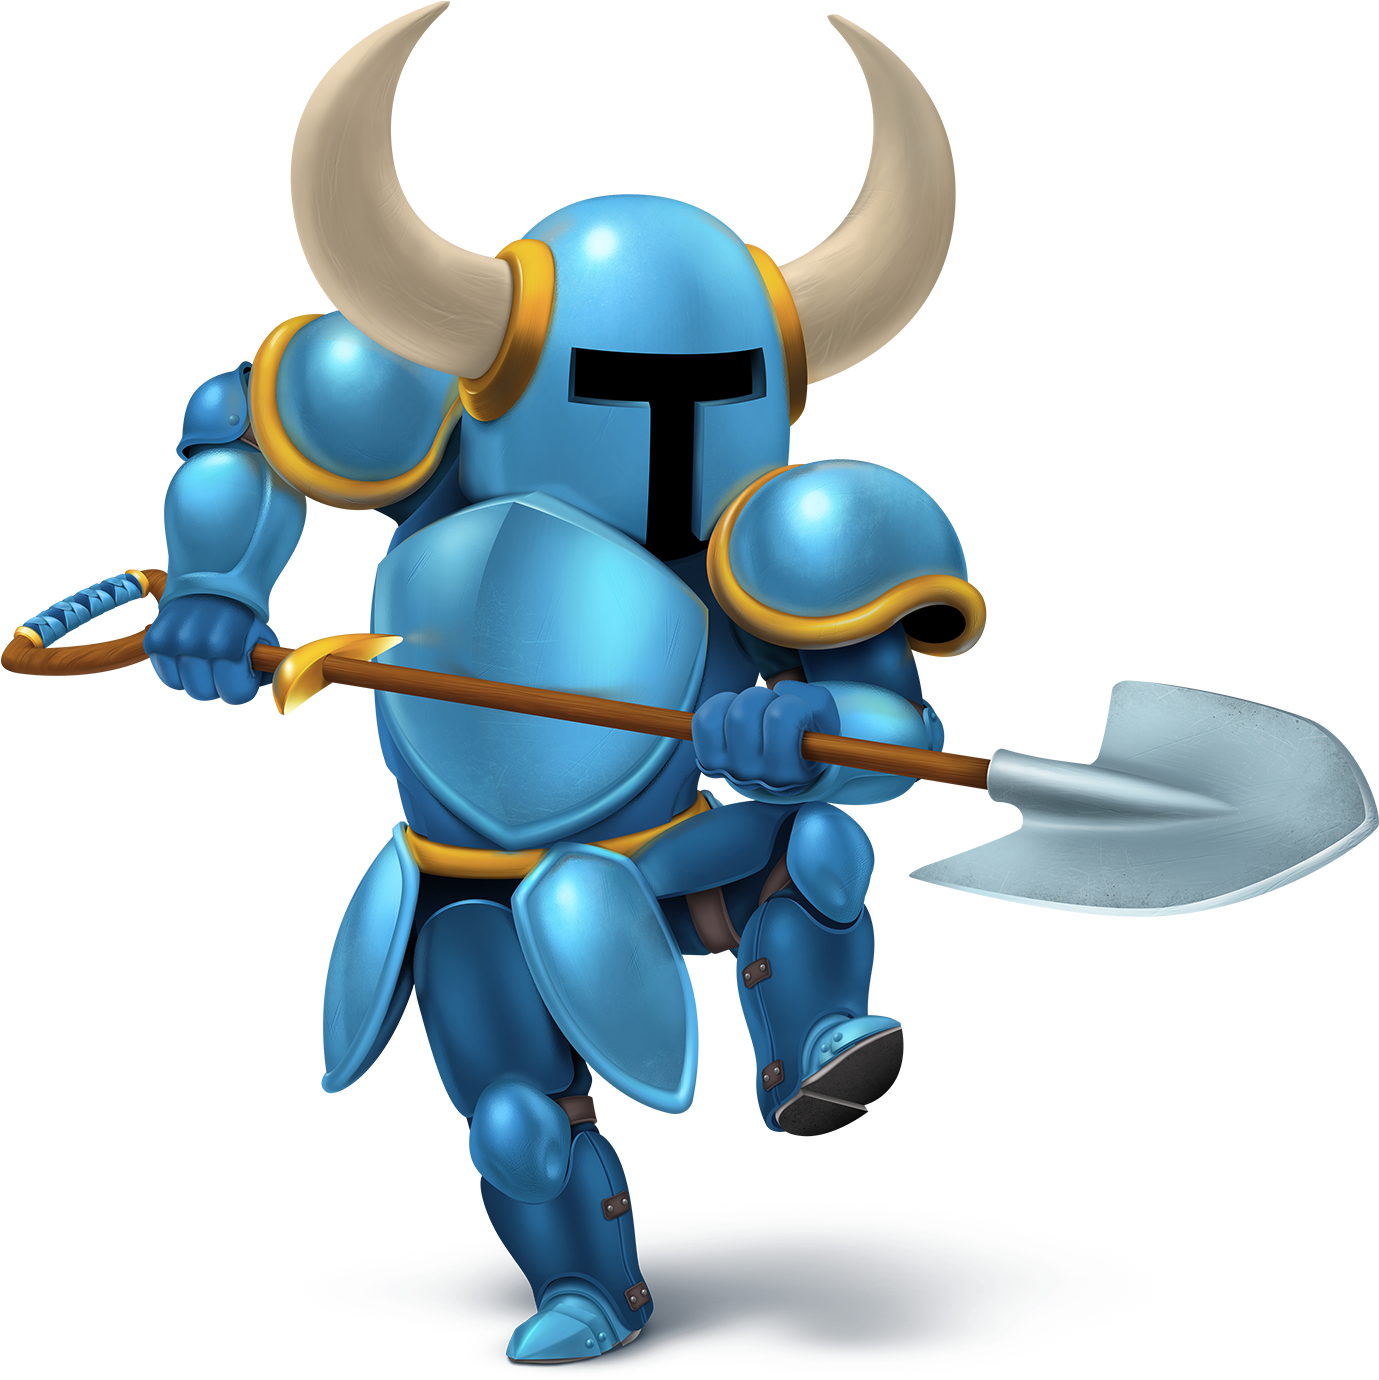 A Cartoon Character In Armor Holding A Shovel